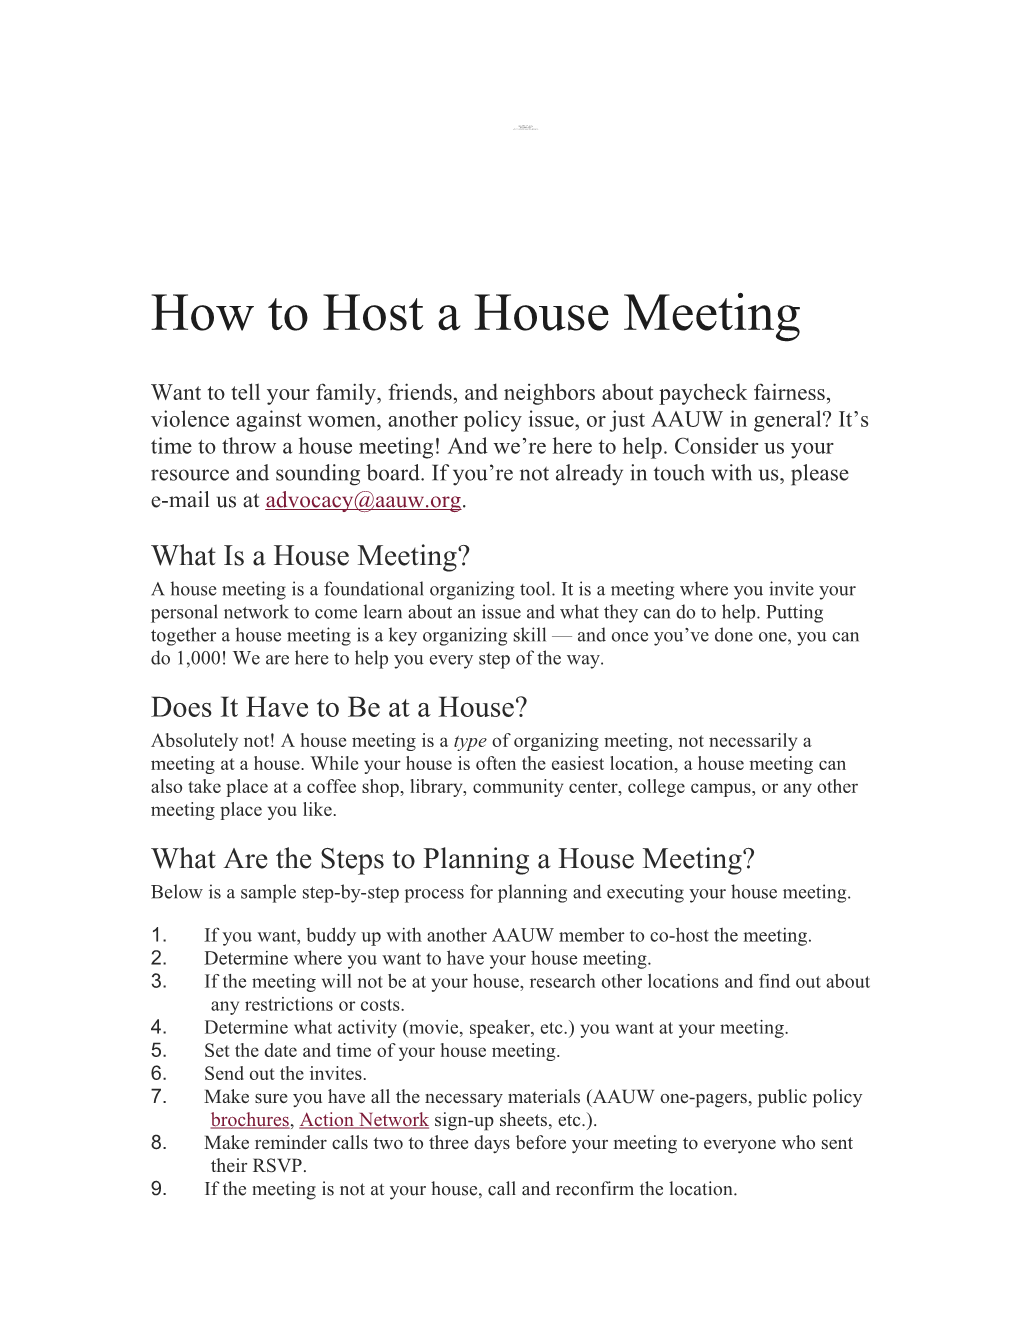 How to Host a House Meeting